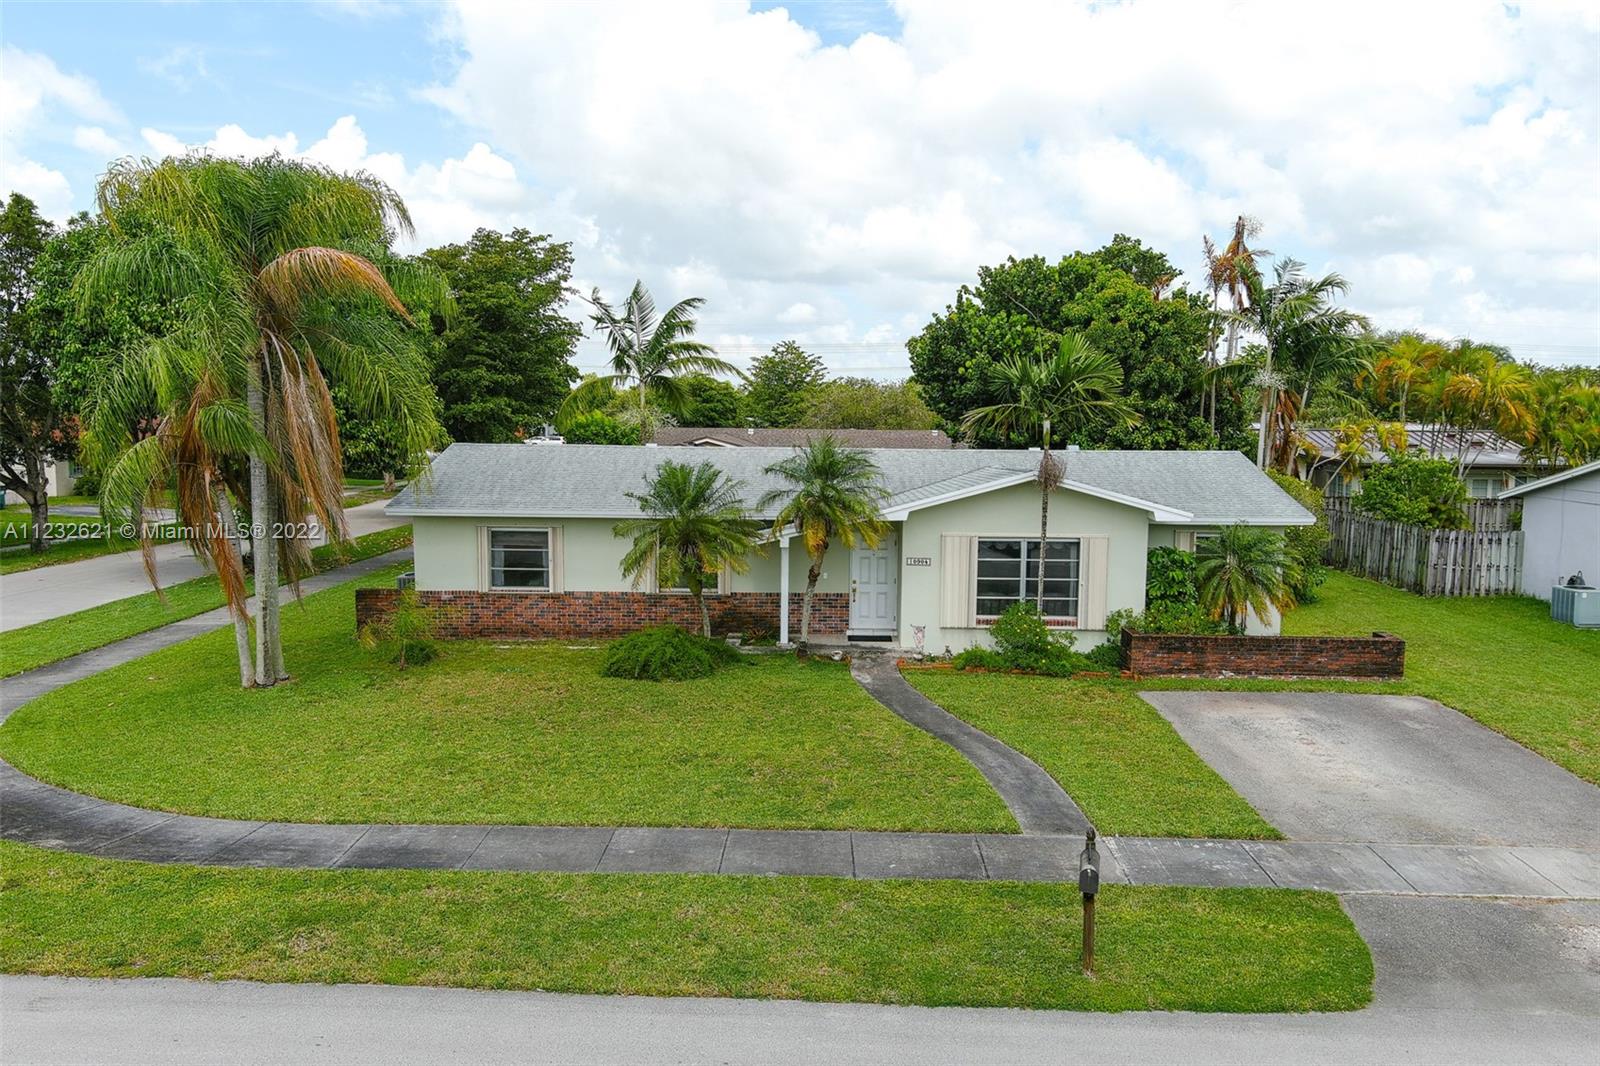 Great Family Neighborhood in Devon Aire Estates with A+ Schools.  *NO HOA*  3/2 Single Family Home on a Corner Lot.  Newer Roof (2018), water heater (2019) and Air-conditioning (2016).  Accordion shutters and storage room. Near MDCC Kendall, Town & Country Mall, The Falls, Dadeland Mall, Parks and ZooMiami. Motivated Seller.